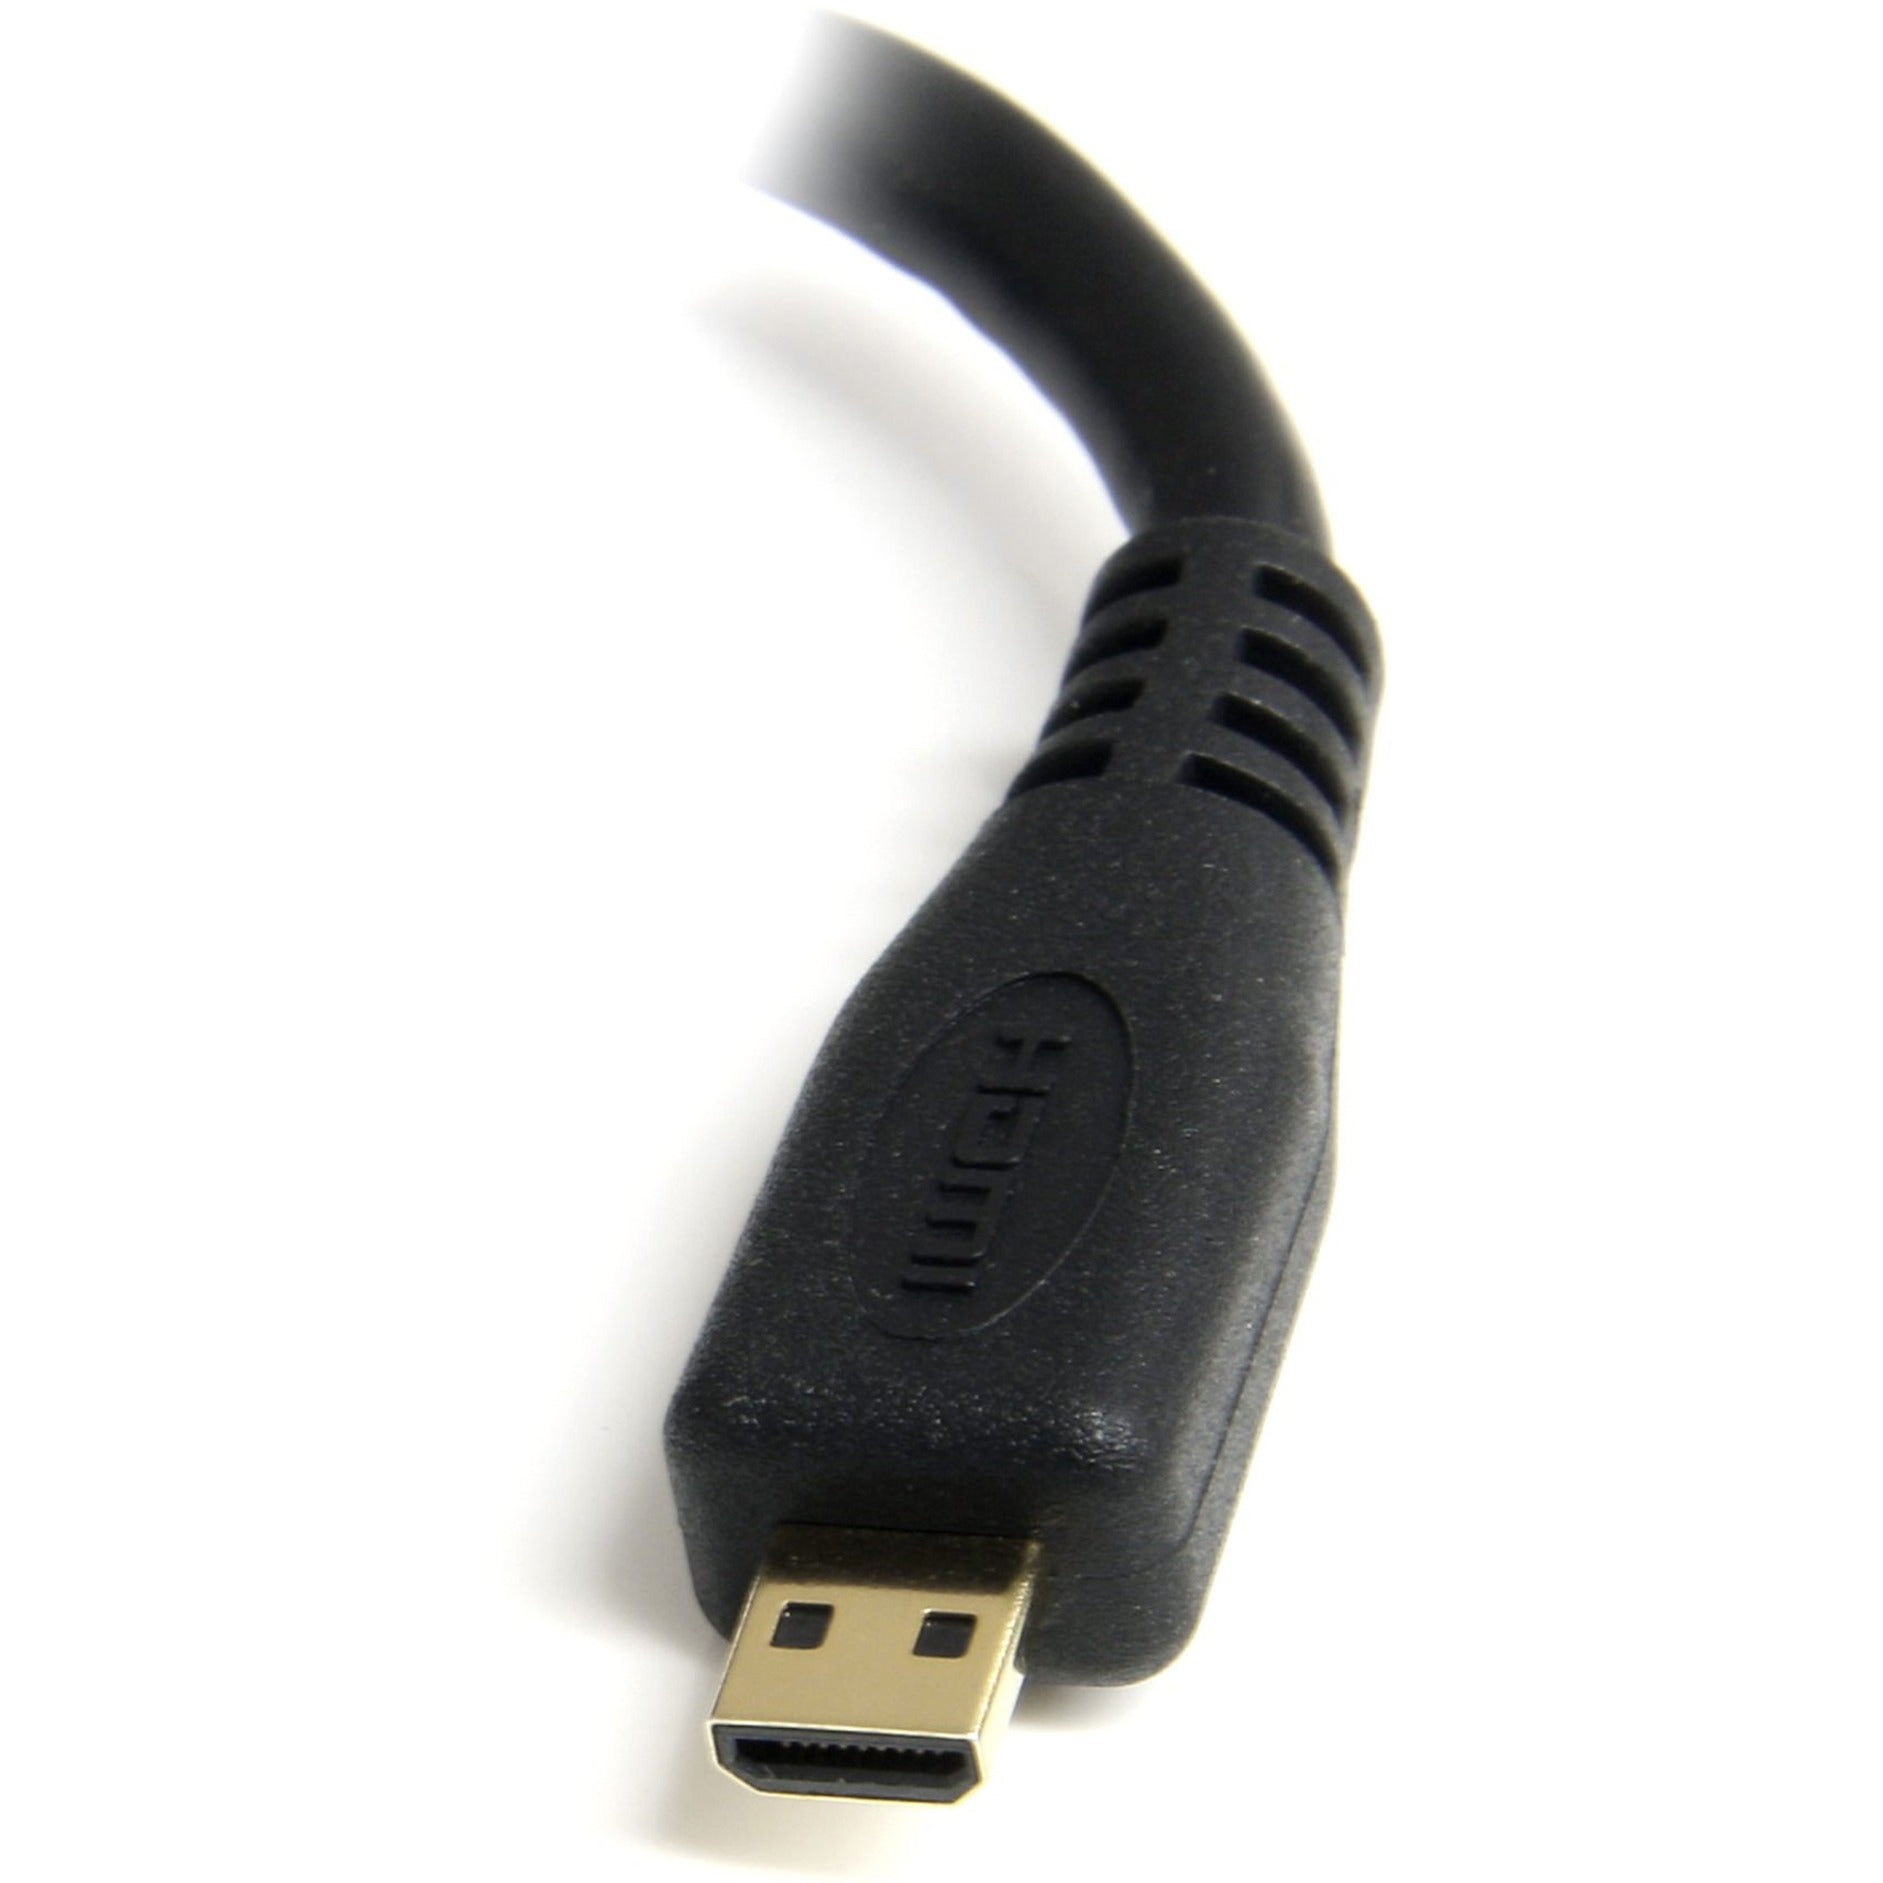 StarTech.com HDADFM5IN 5in High Speed HDMI Adapter Cable - HDMI to HDMI Micro - F/M, 10.2 Gbit/s Data Transfer Rate, 4096 x 2160 Supported Resolution